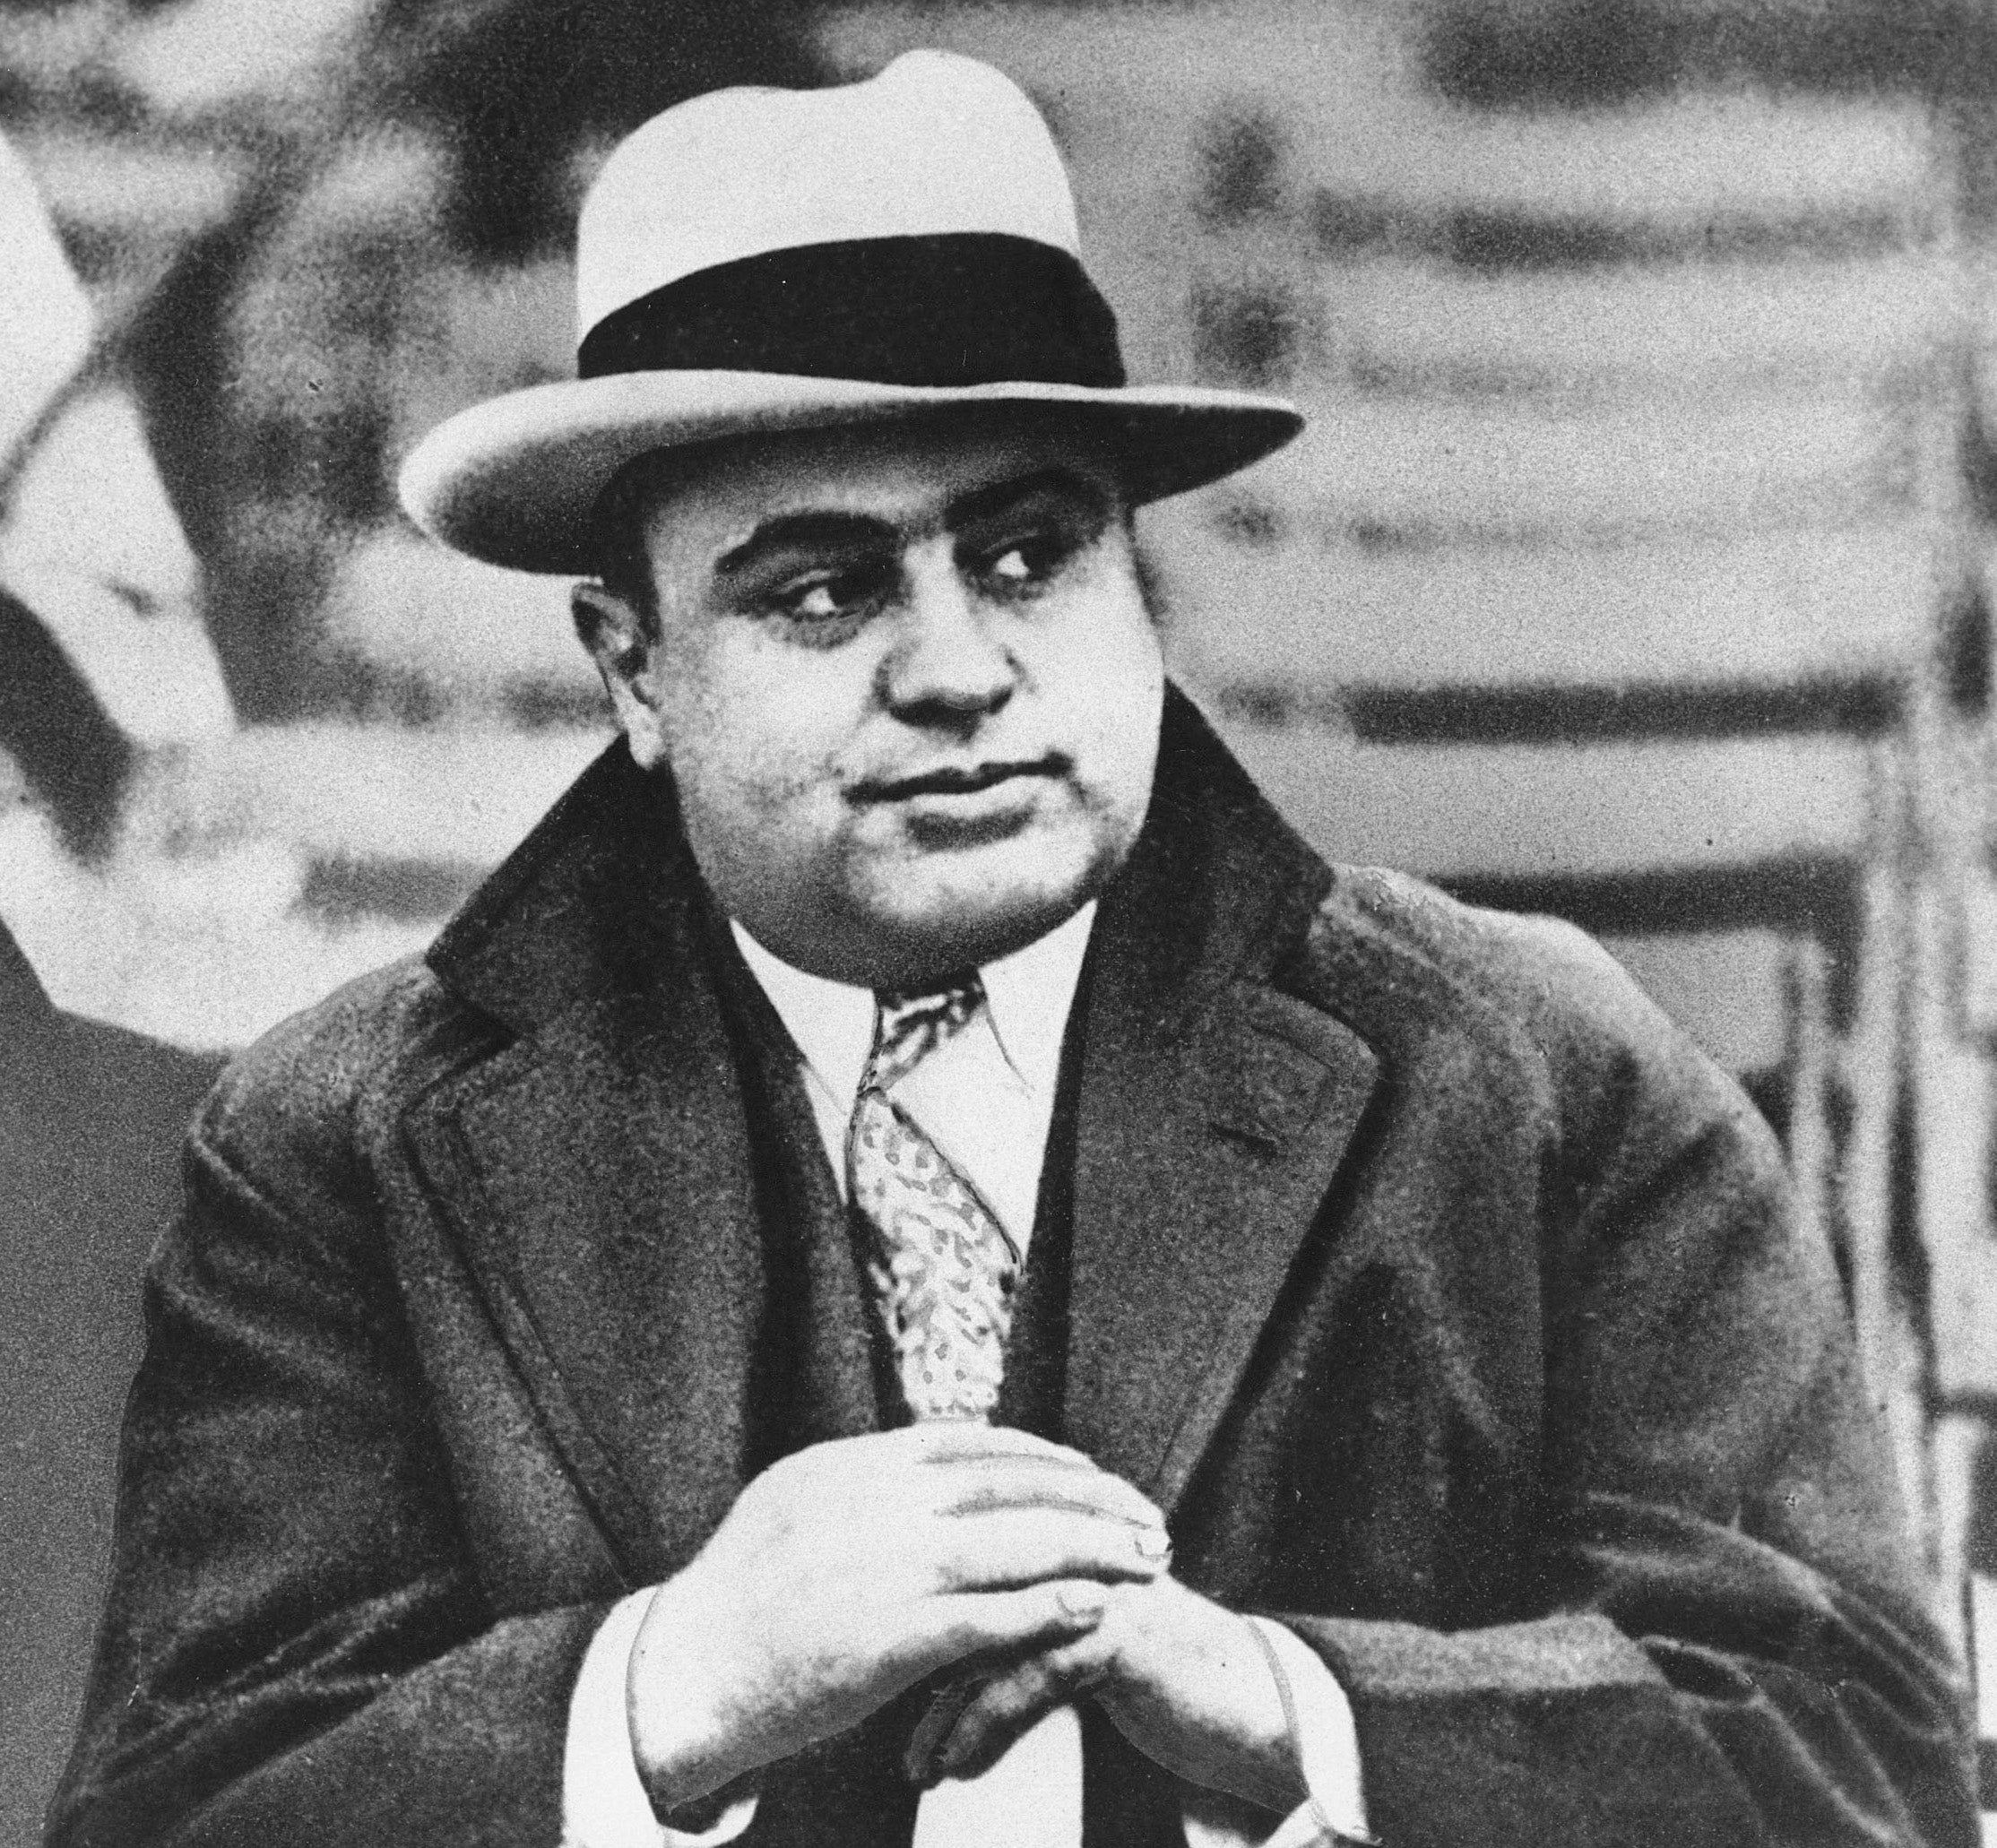 File: Chicago mobster Al Capone attends a football game in Chicago in this 19 January 1931 photo